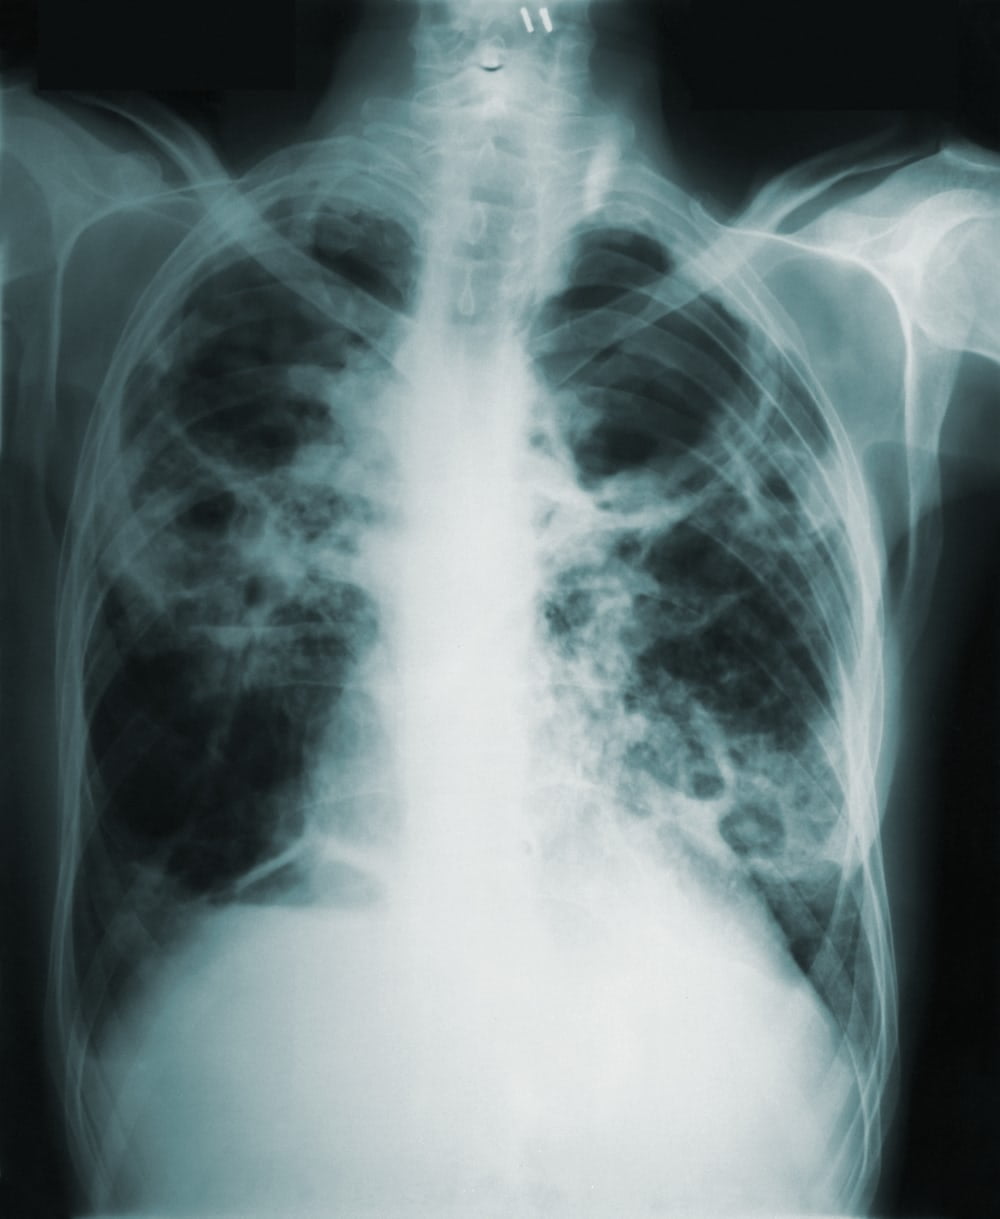 Tuberculosis (TB): A Serious but Curable Disease